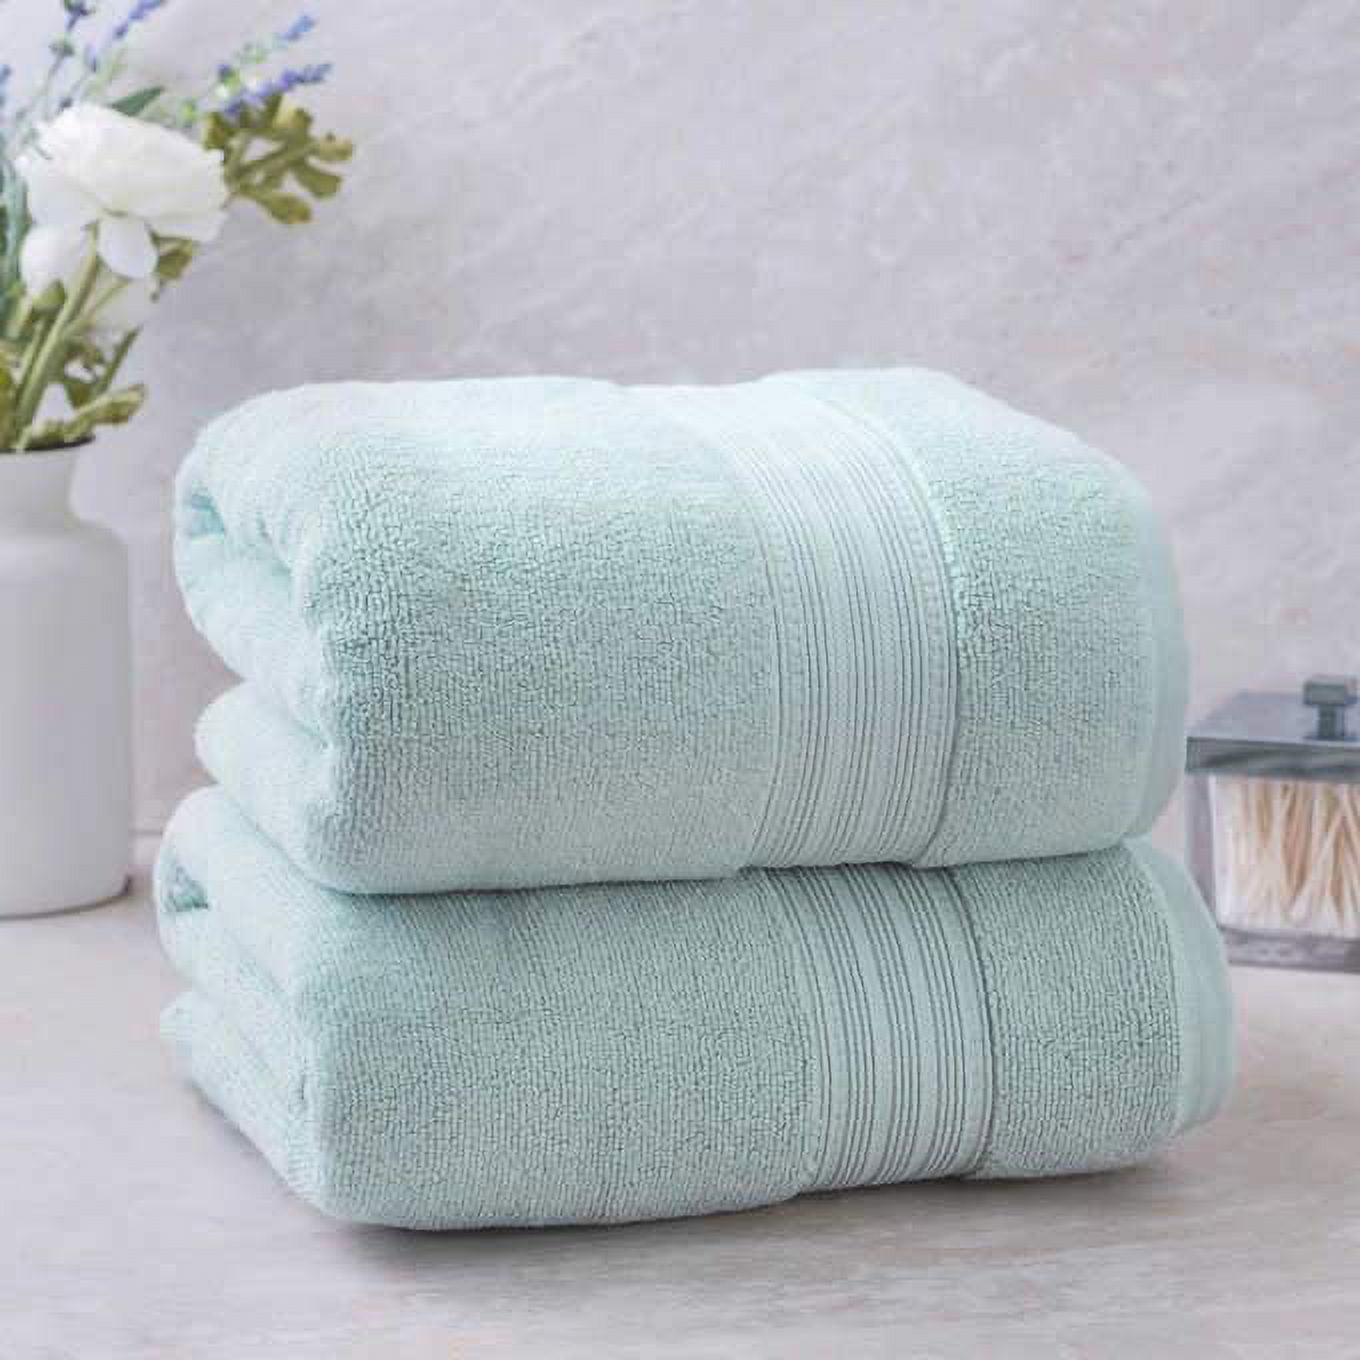 2 new NAVY BLUE Sonoma Ultimate 100% Hygro Cotton 30x54 inch BATH Towels